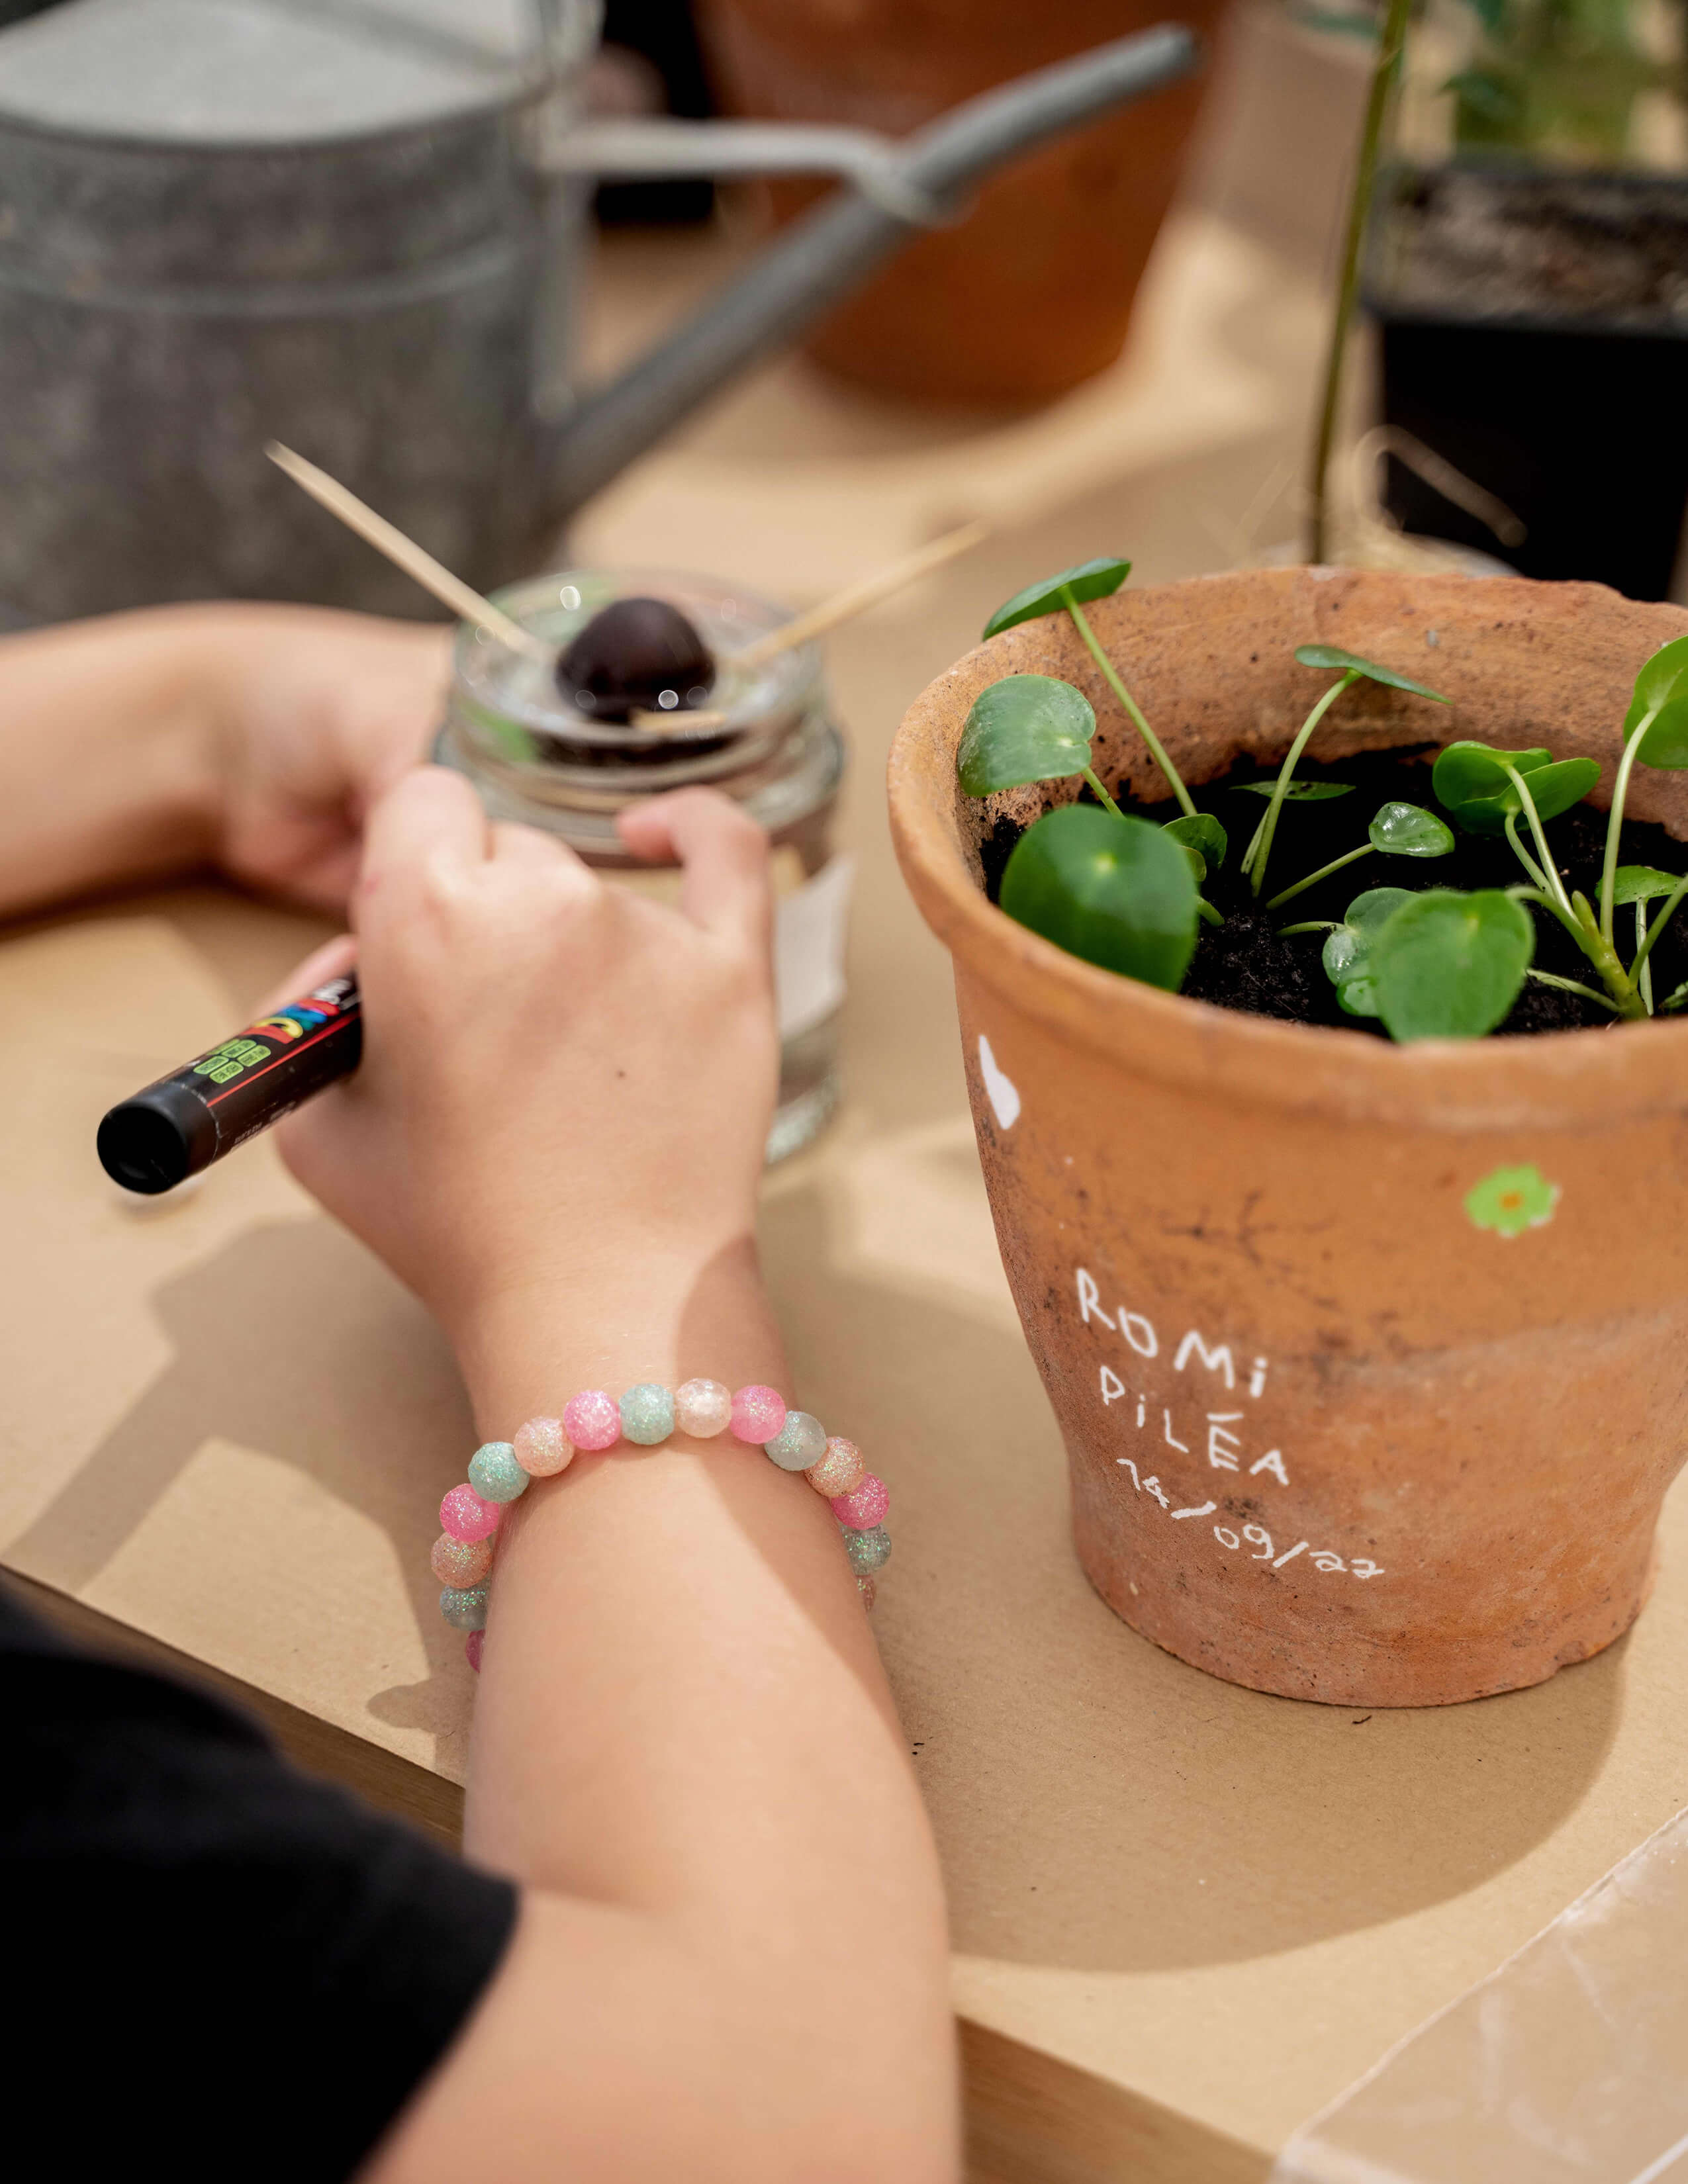 A pair of hands held a pen on the table writing something on the jar with an avocado seed on it while there was a potted plant with names on it next to it.